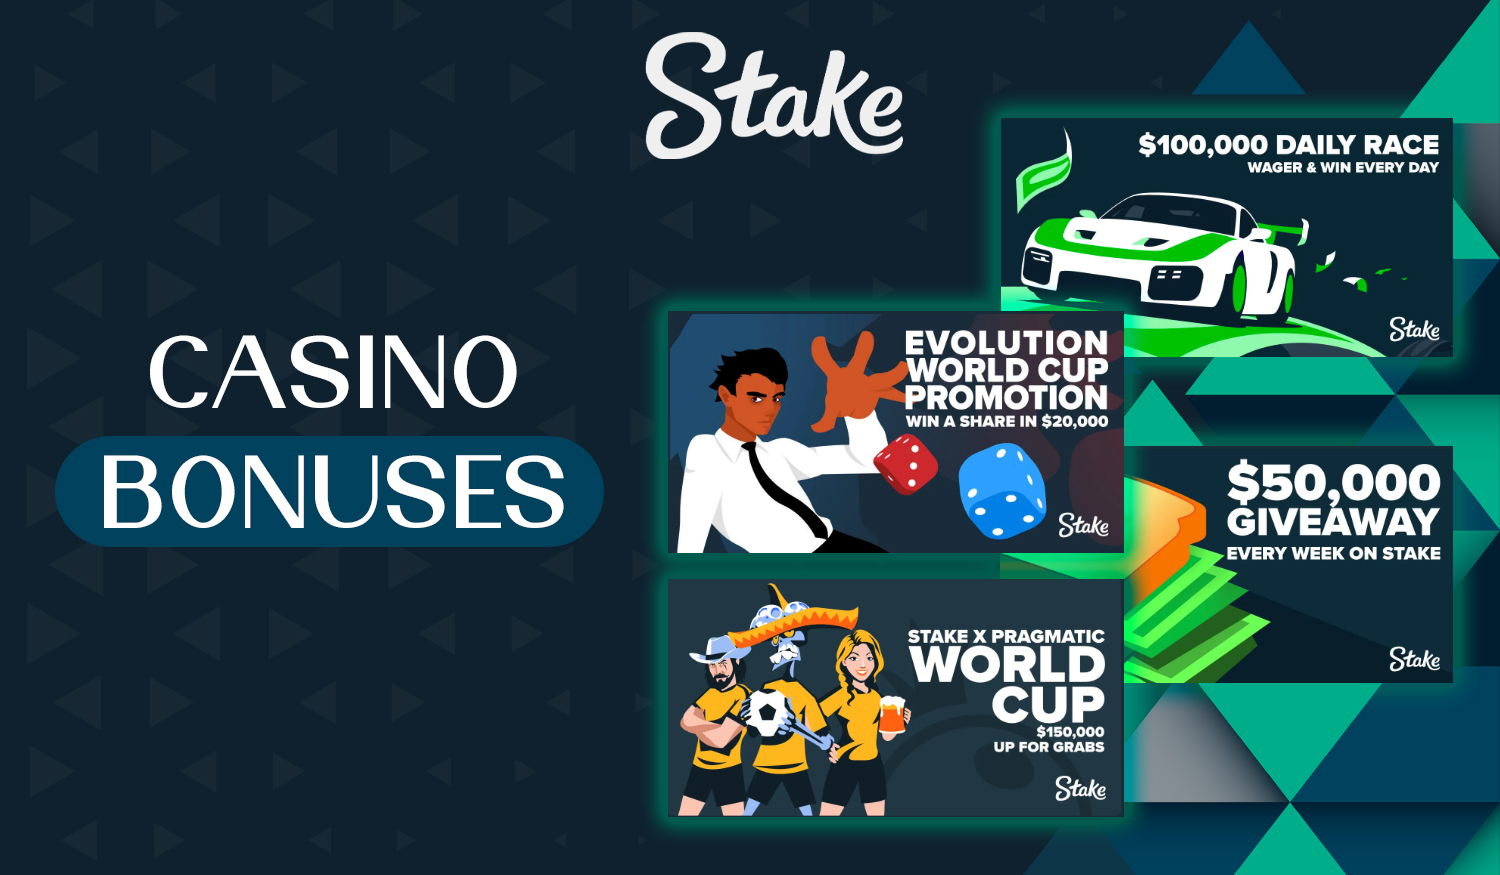 How Indian casino lovers can take advantage of the bonus program at Stake 